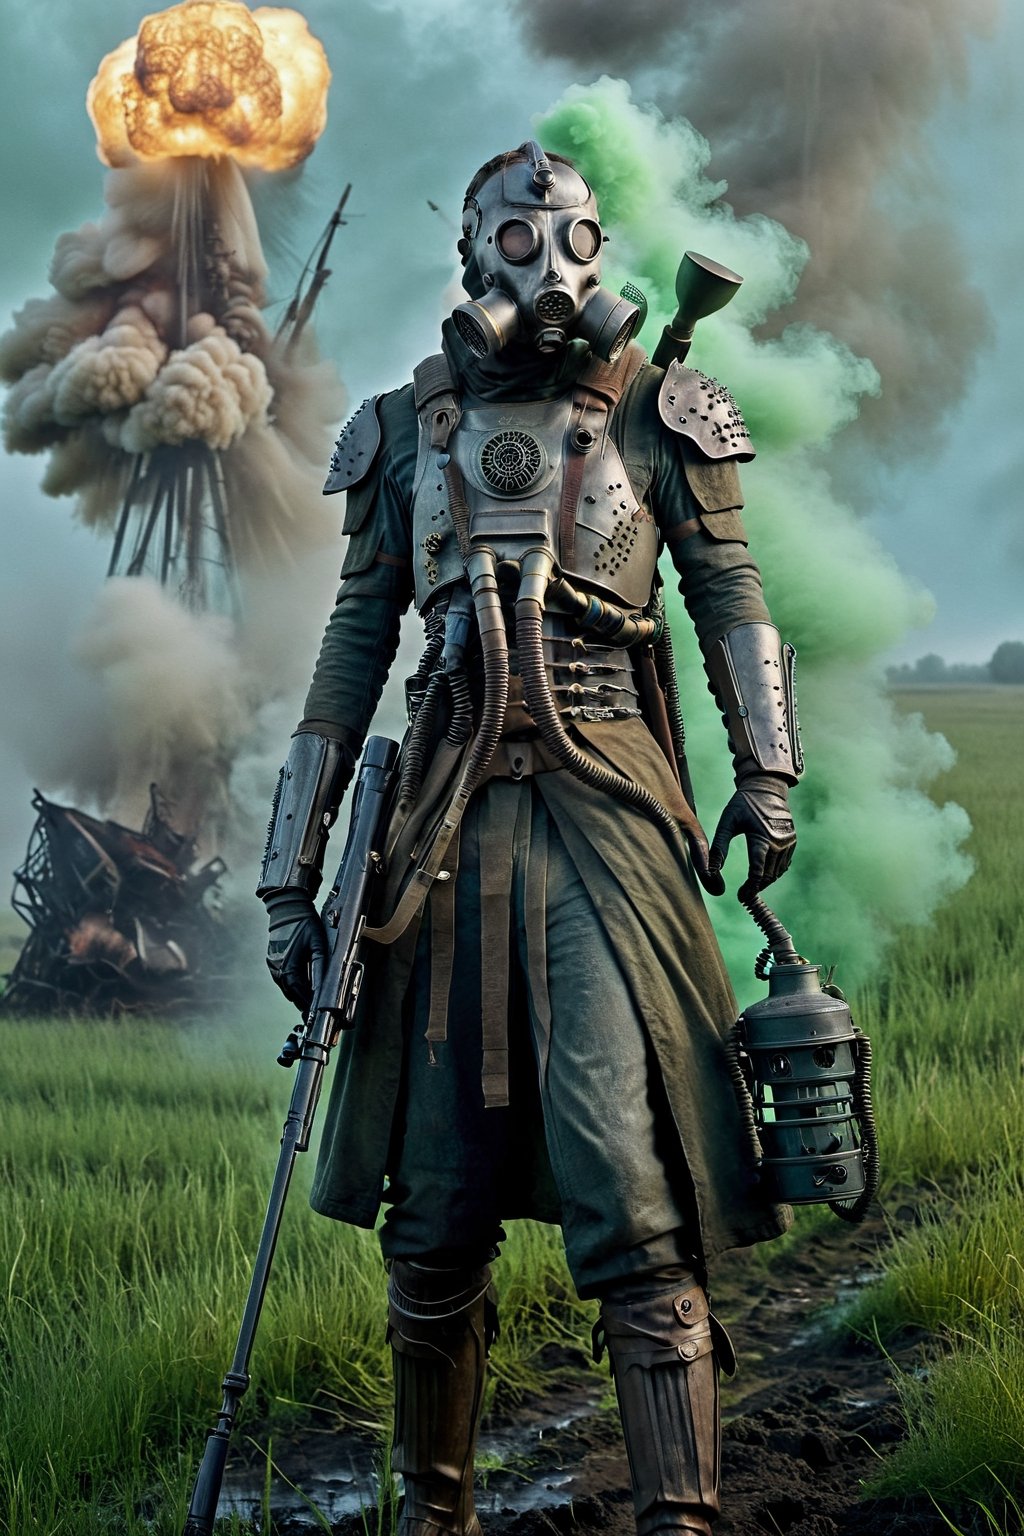 Extremely realistic, horror scene,a plaguemarine ww1ger with gas mask and armor, holding rifle, explosions, green mist, fog, smoke, slime, Field telephones, Dawn, , (, , ,, Scales, Spiral, ultra detailed, intricate, , (surrealism:1.1), (disturbing:1.1), tense atmosphere. photo r3al,Magical Fantasy style,inst4 style,darkart,cyborg style